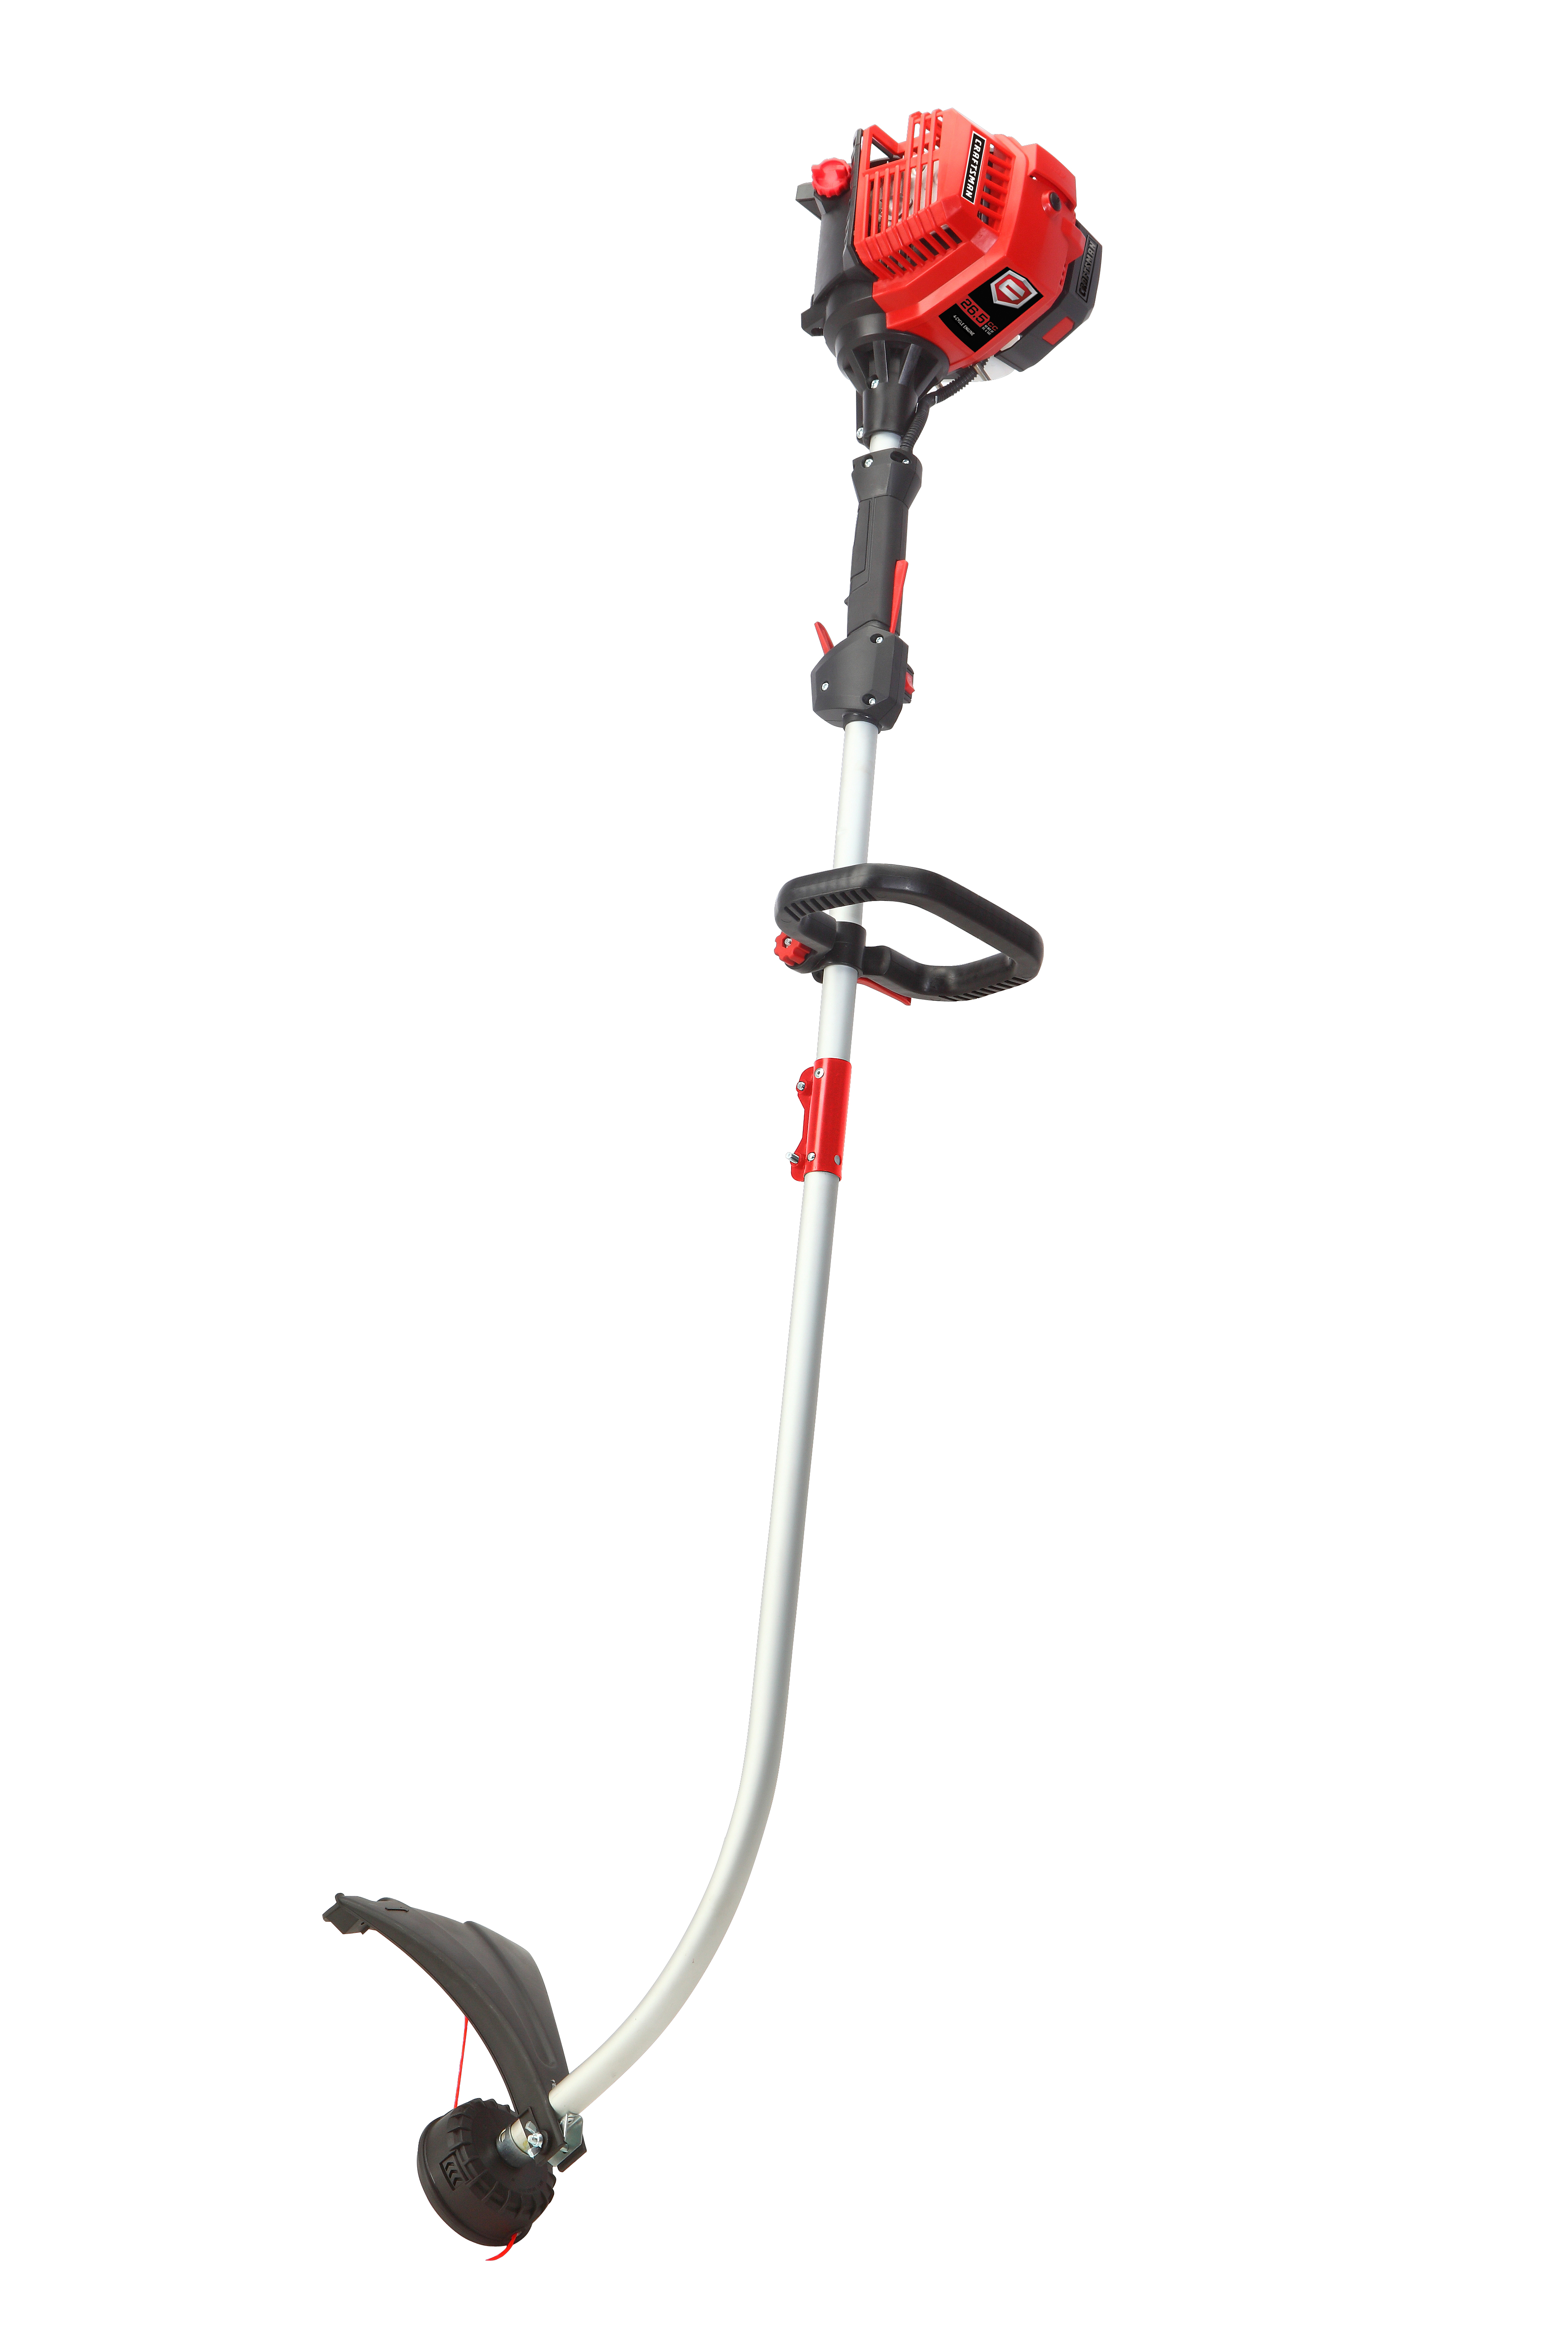 Craftsman 26.5cc 4 cycle Straight Shaft String Trimmer Grass Weeds Wacker Red